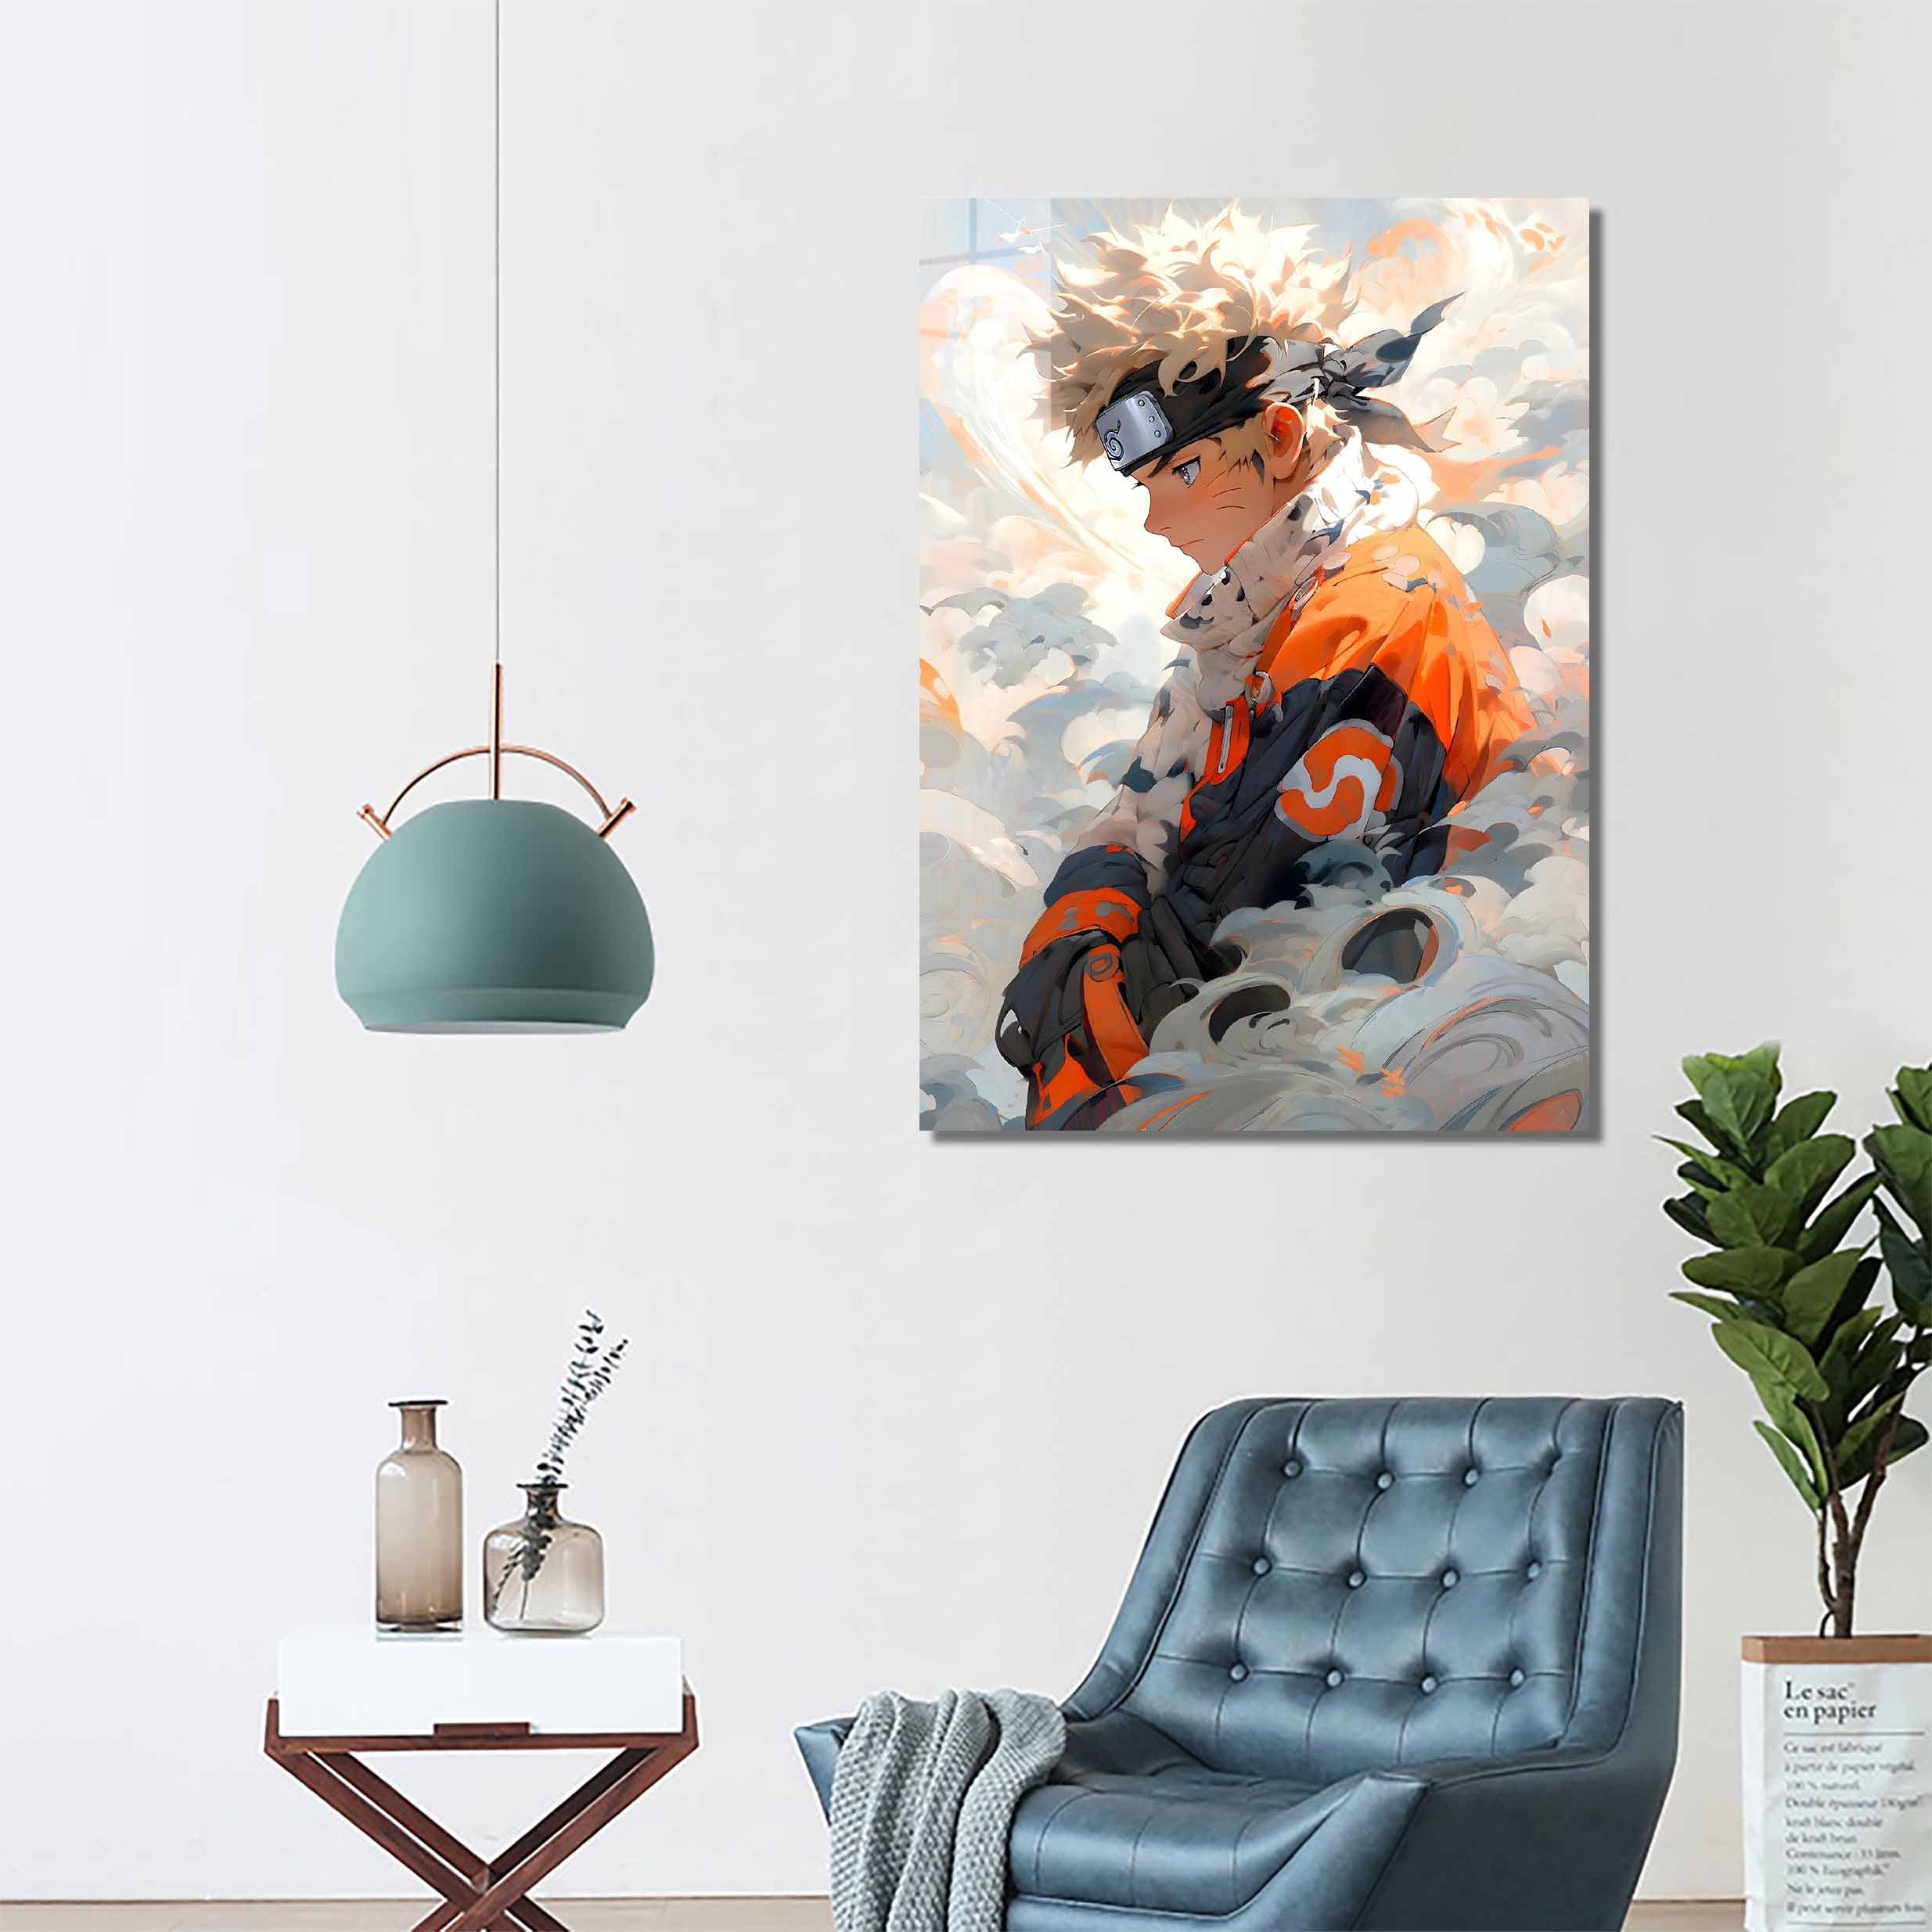 Cloud Naruto-designed by @By_Monkai